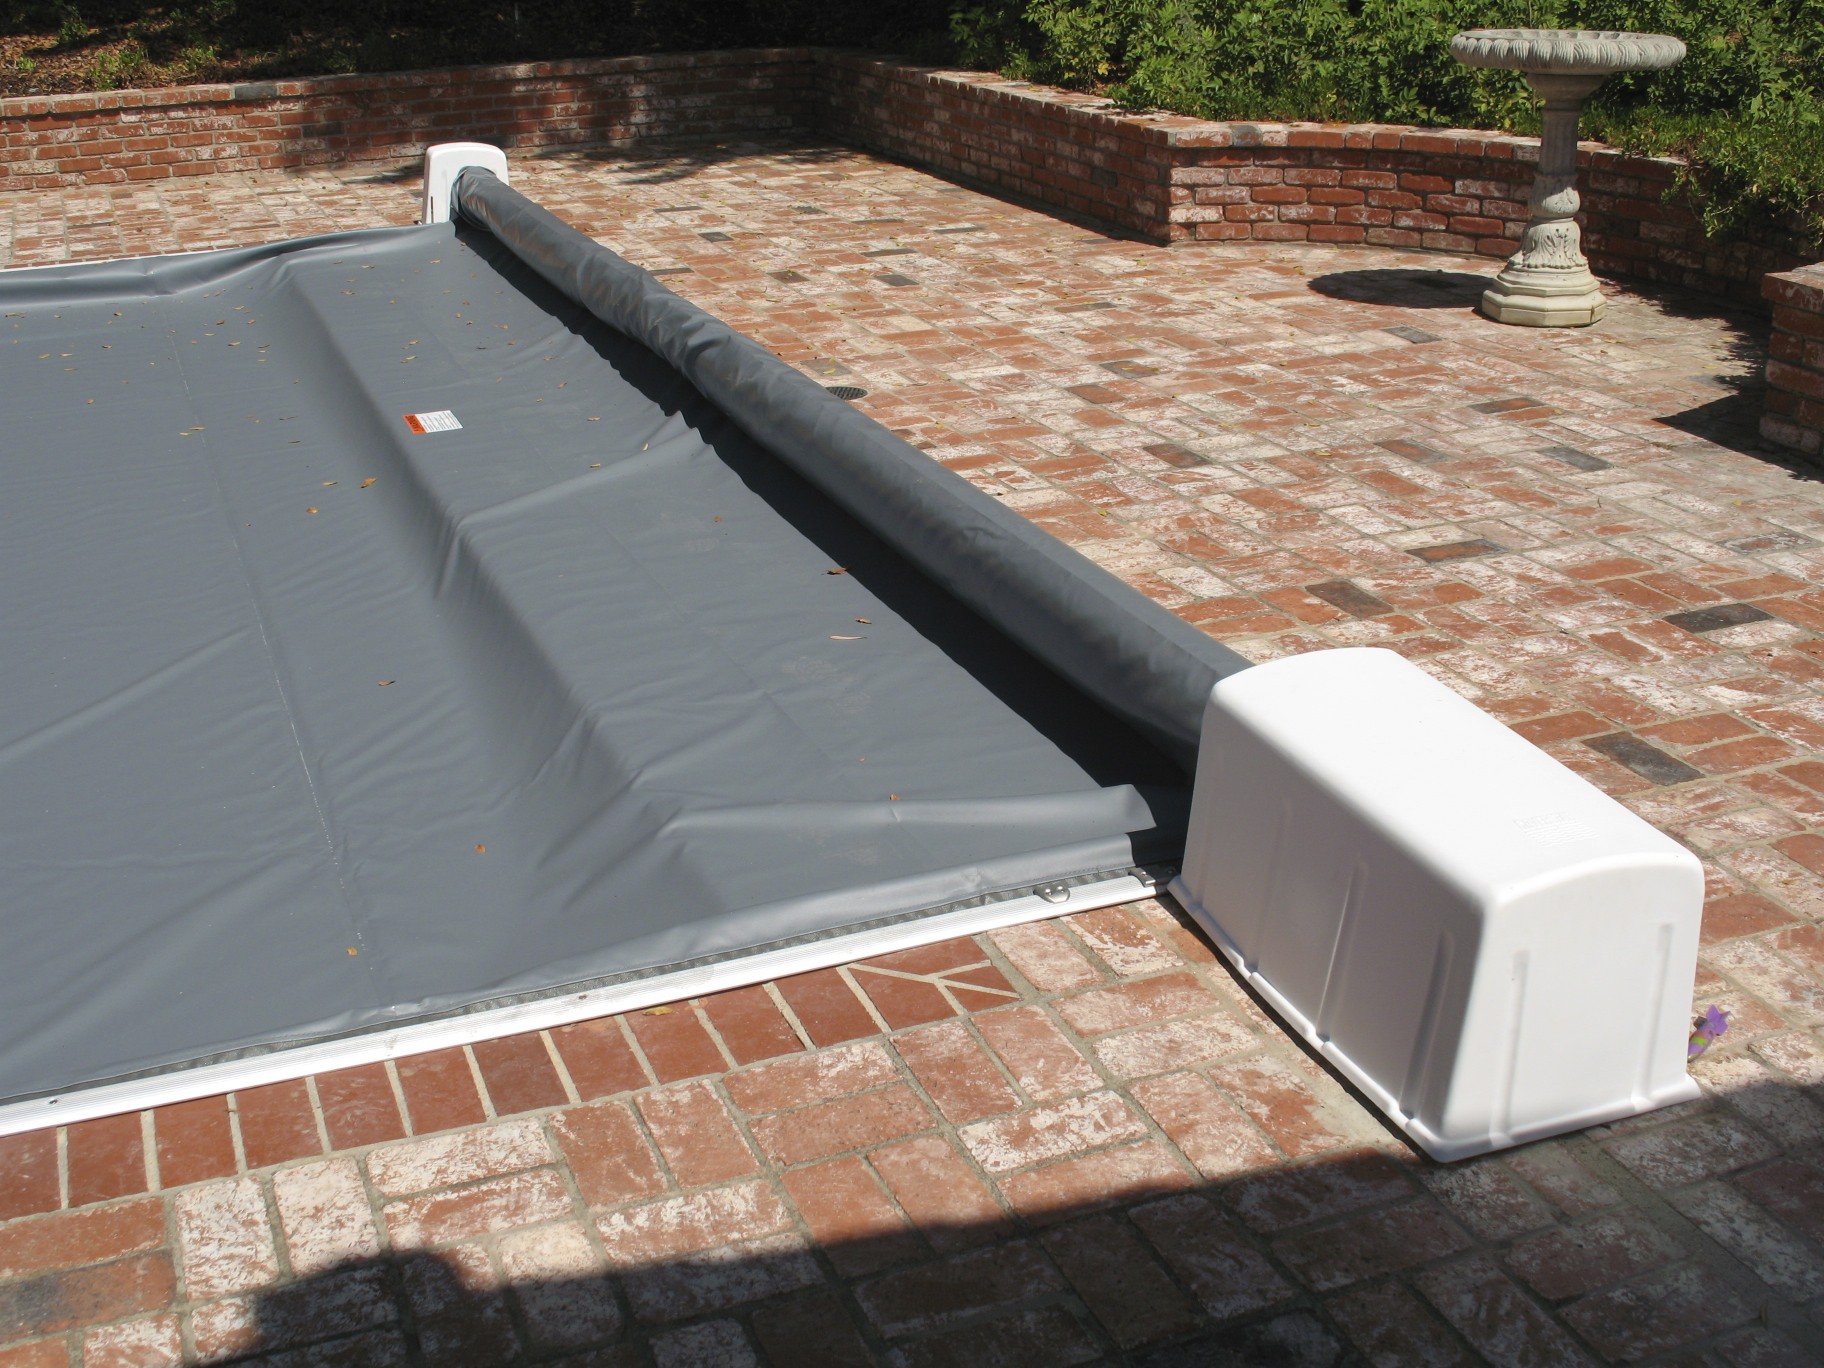 automatic safety pool cover albuquerque